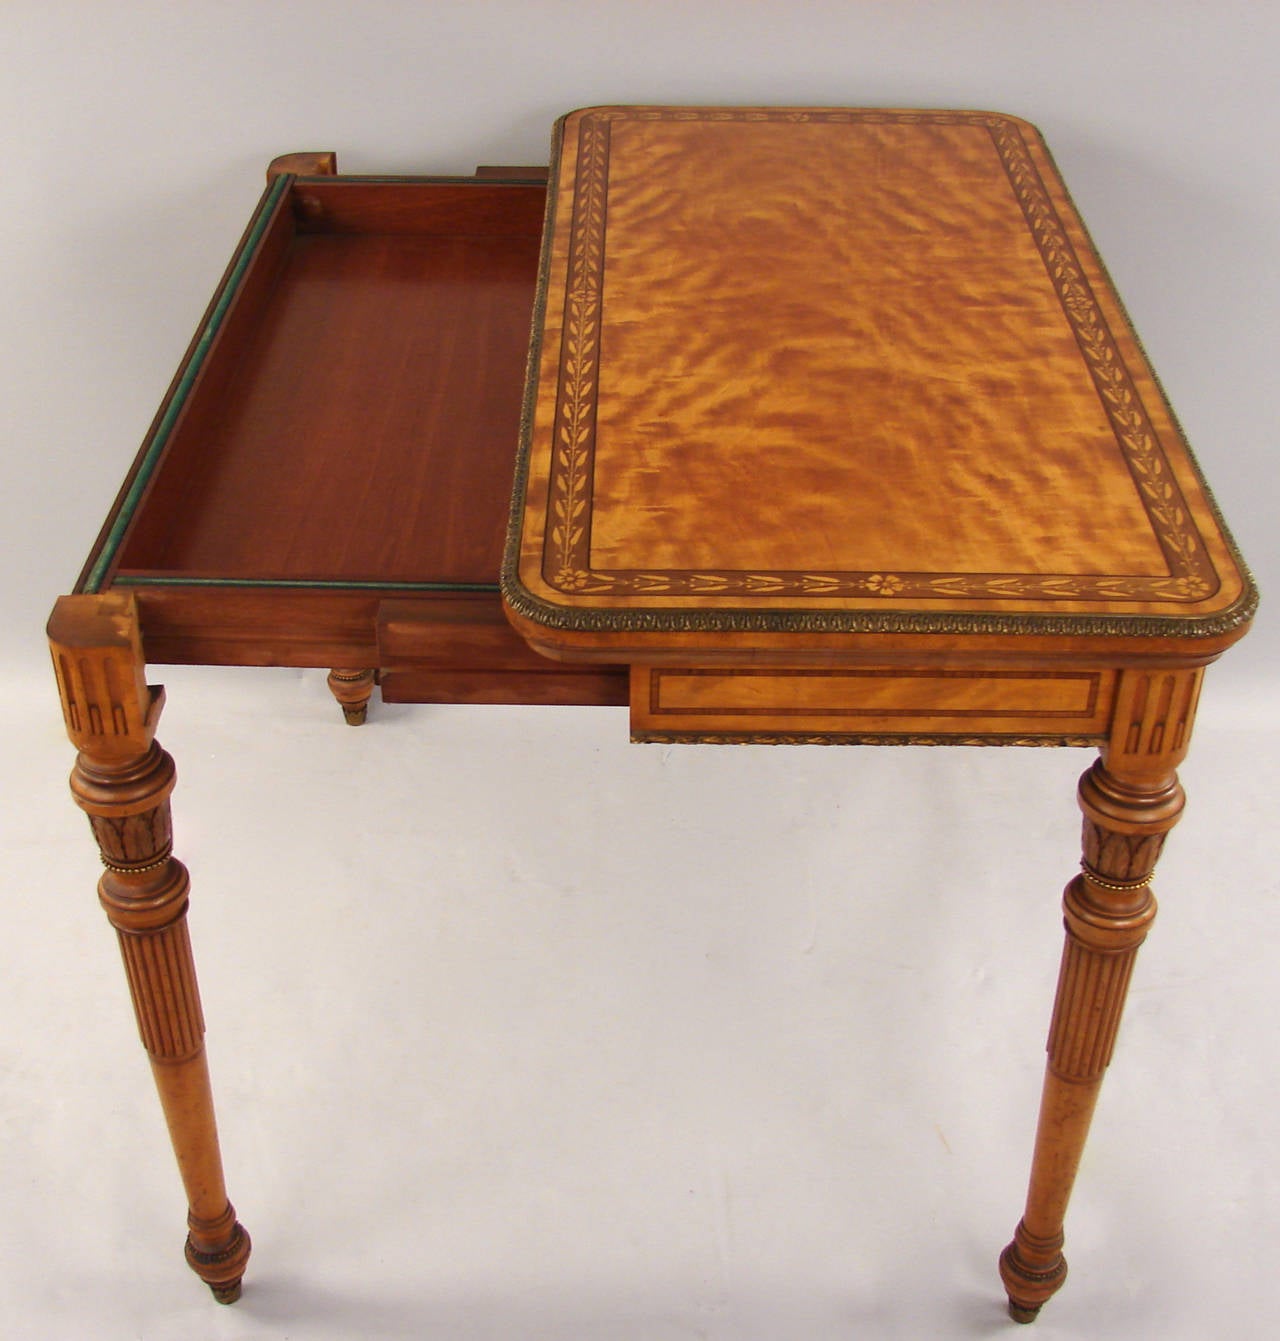 Mid-19th Century Superb Quality English Satinwood Bronze-Mounted Flip Top Games Table